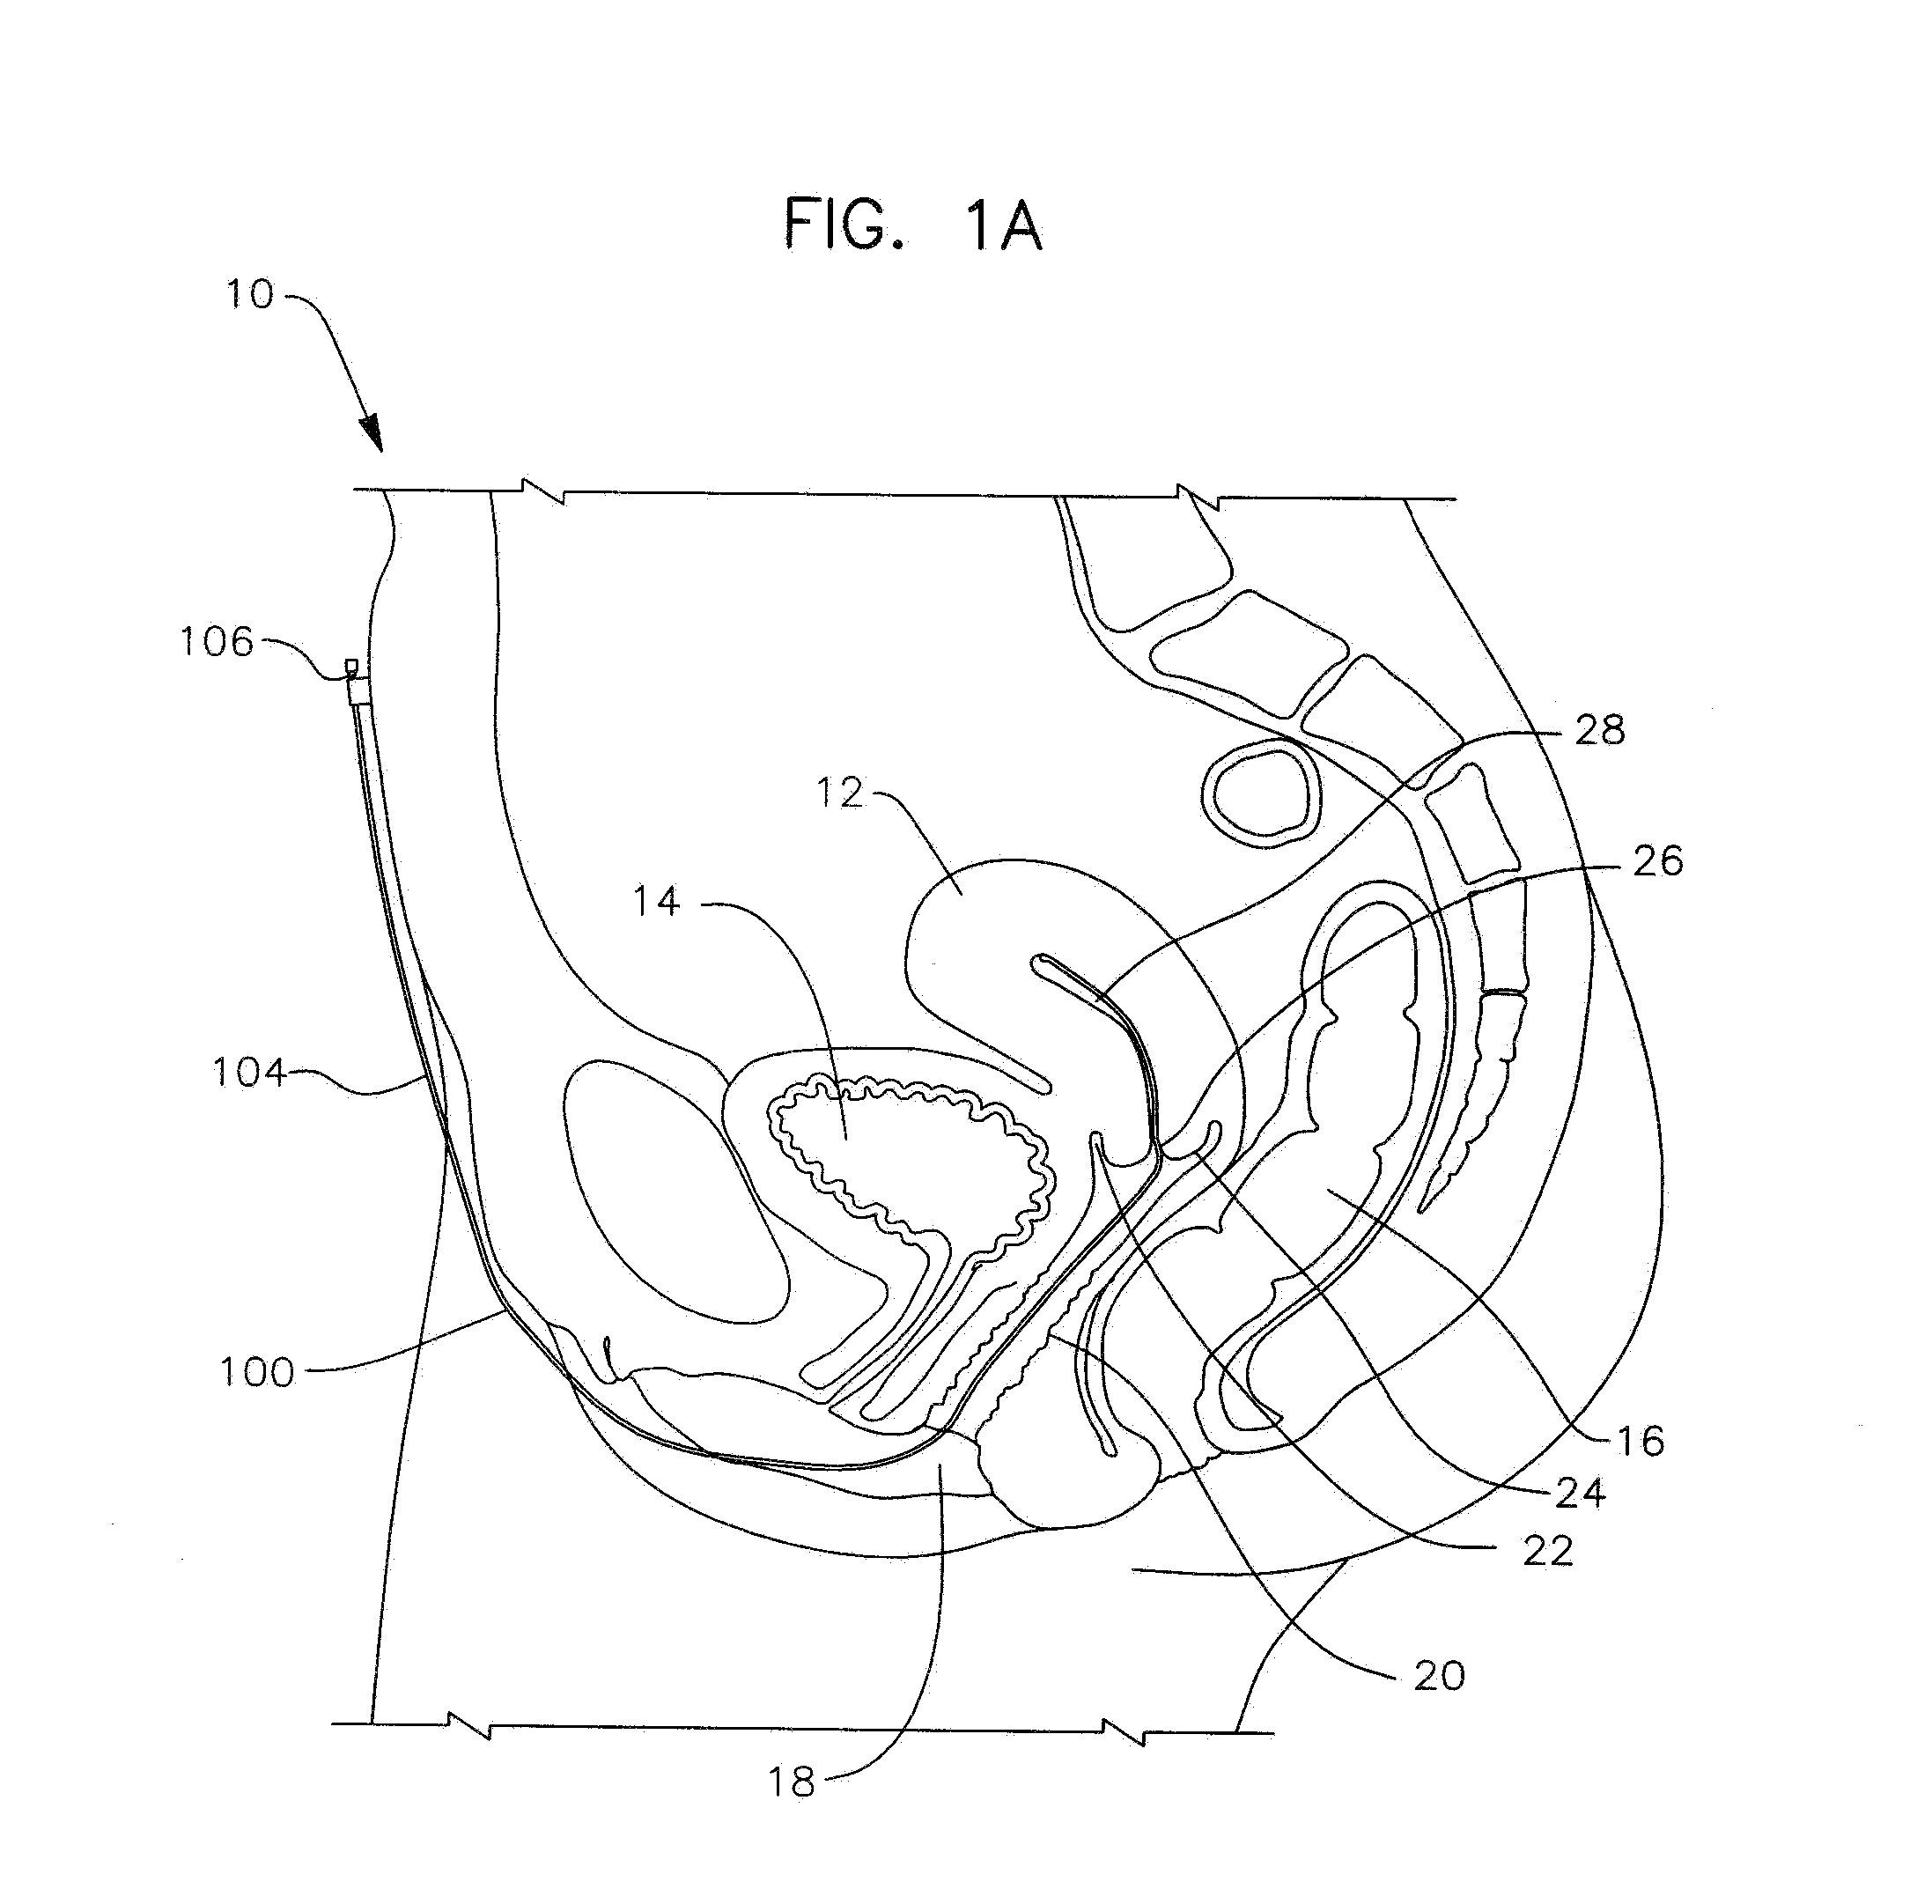 Apparatus and method for the treatment of abnormal uterine bleeding